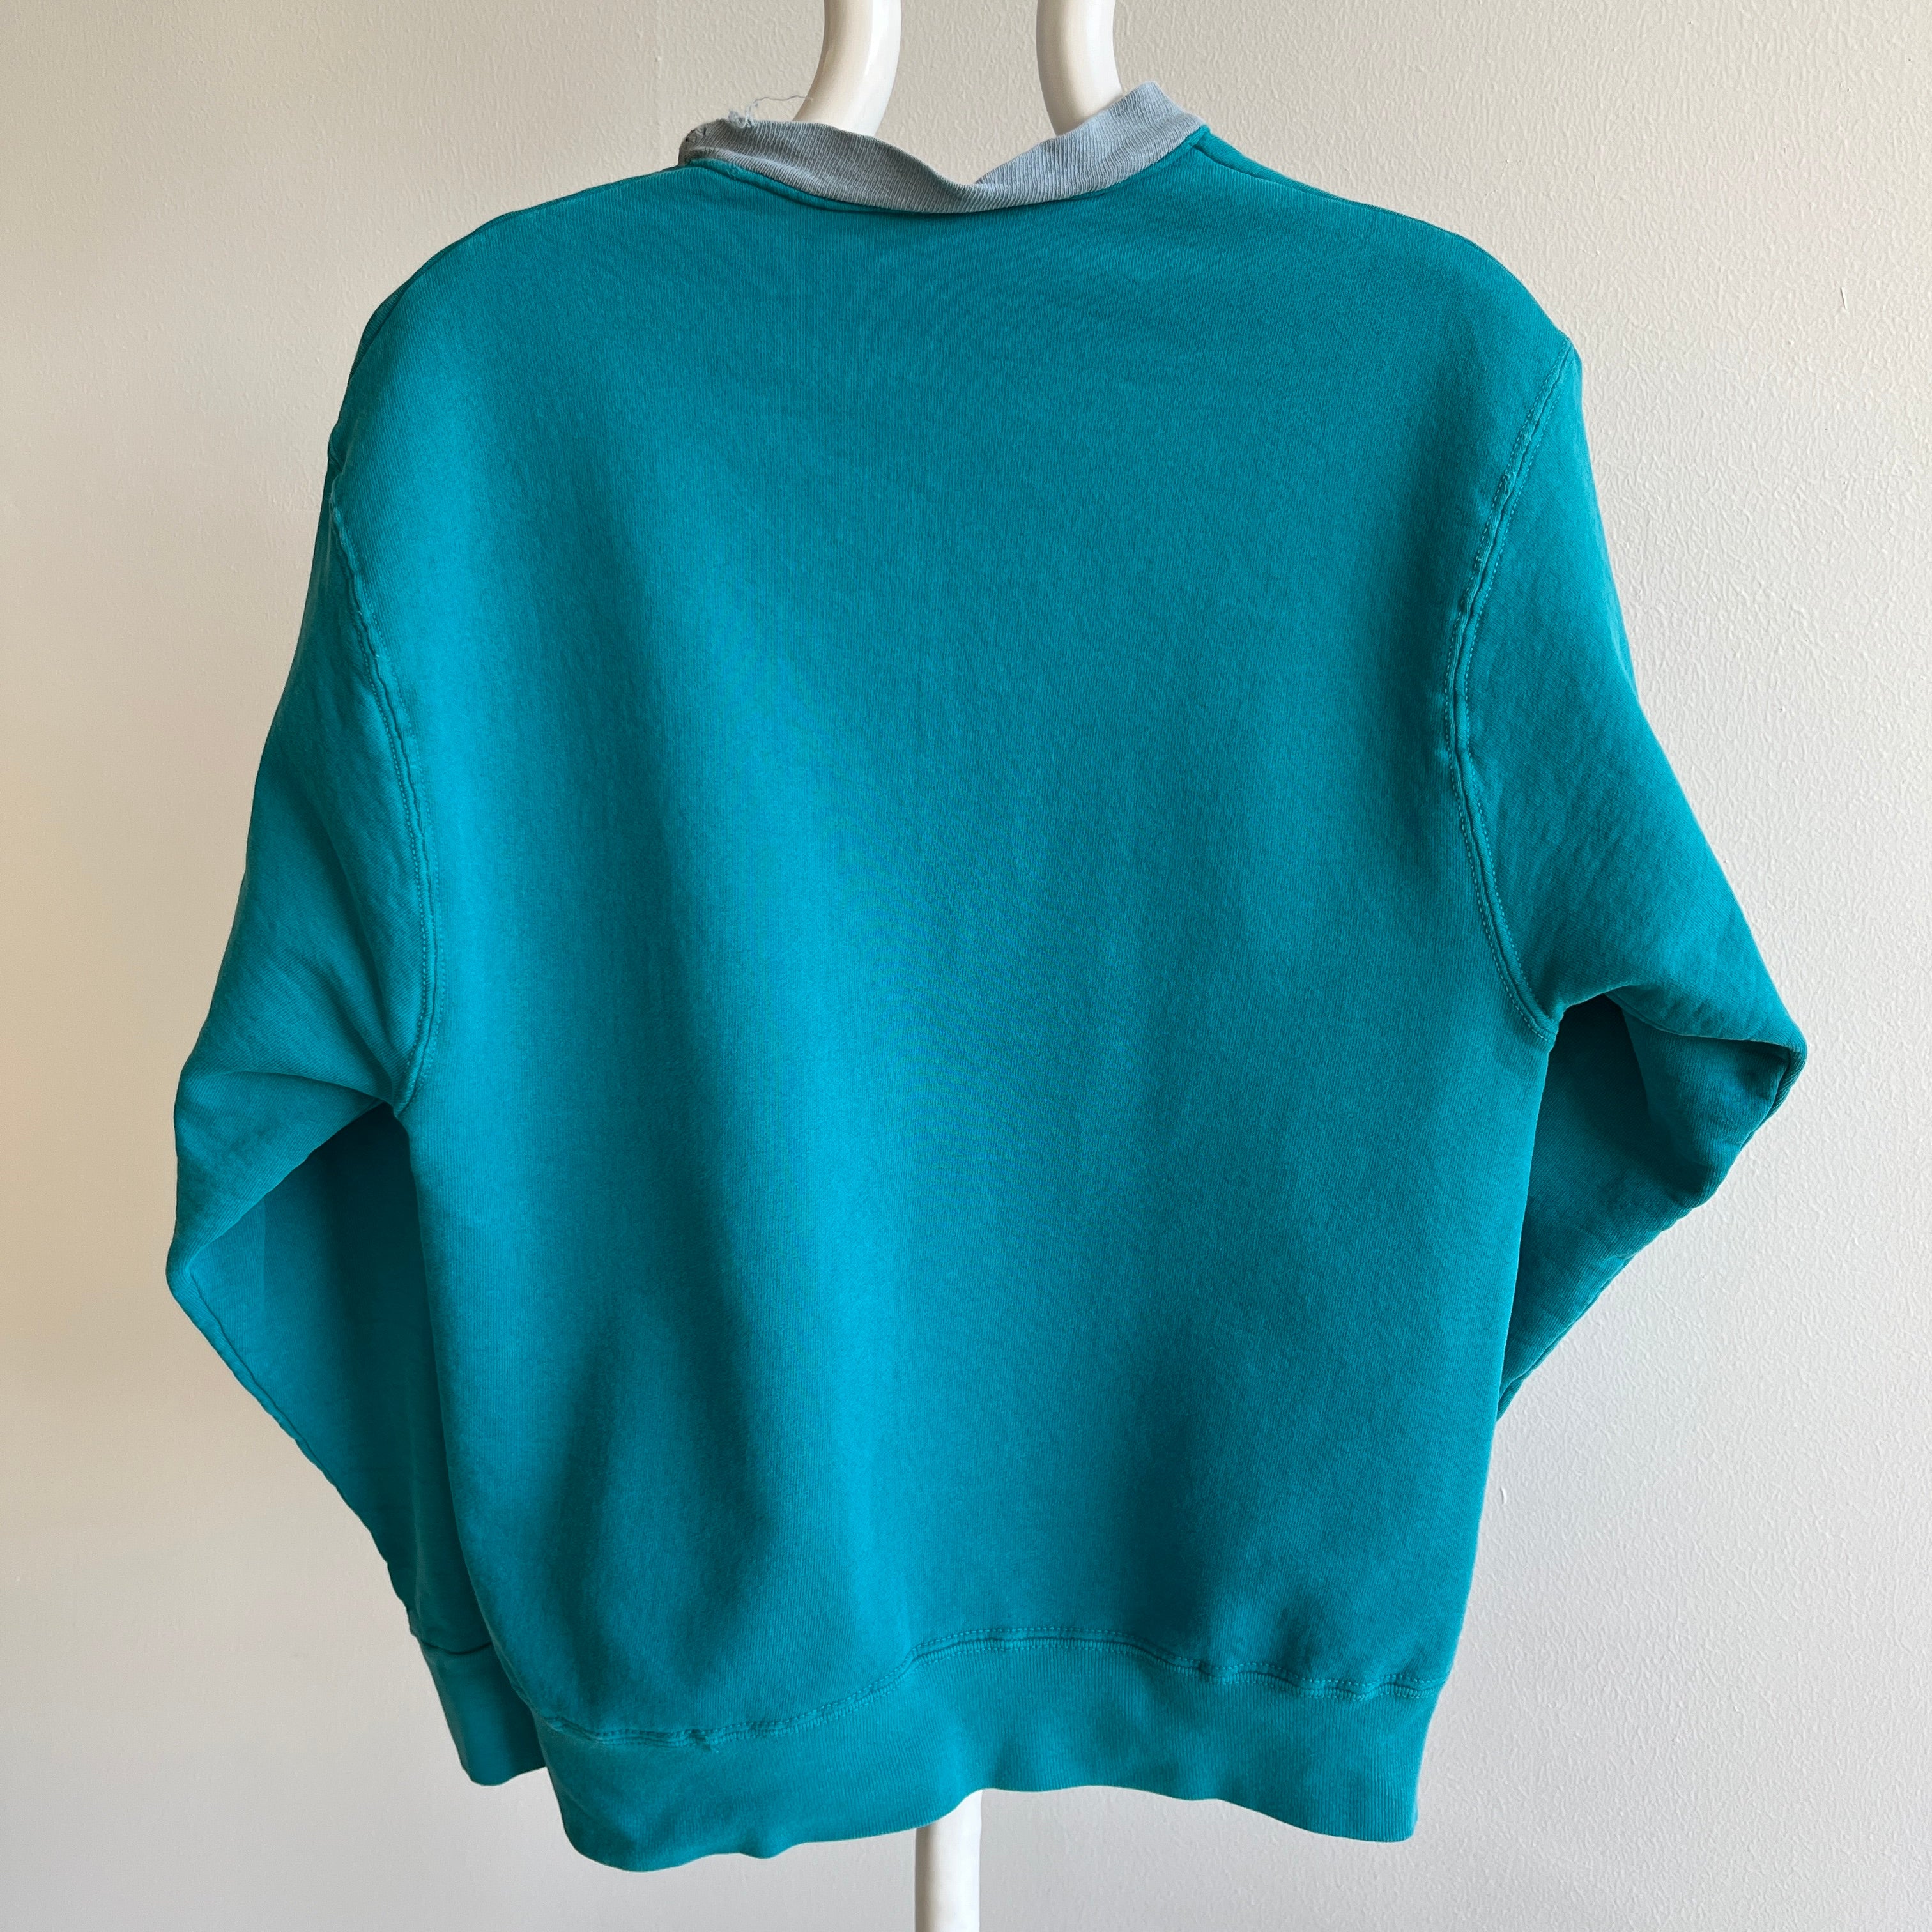 1980s Cotton Heavyweight Sweatshirt with a Completely Thrashed Collar